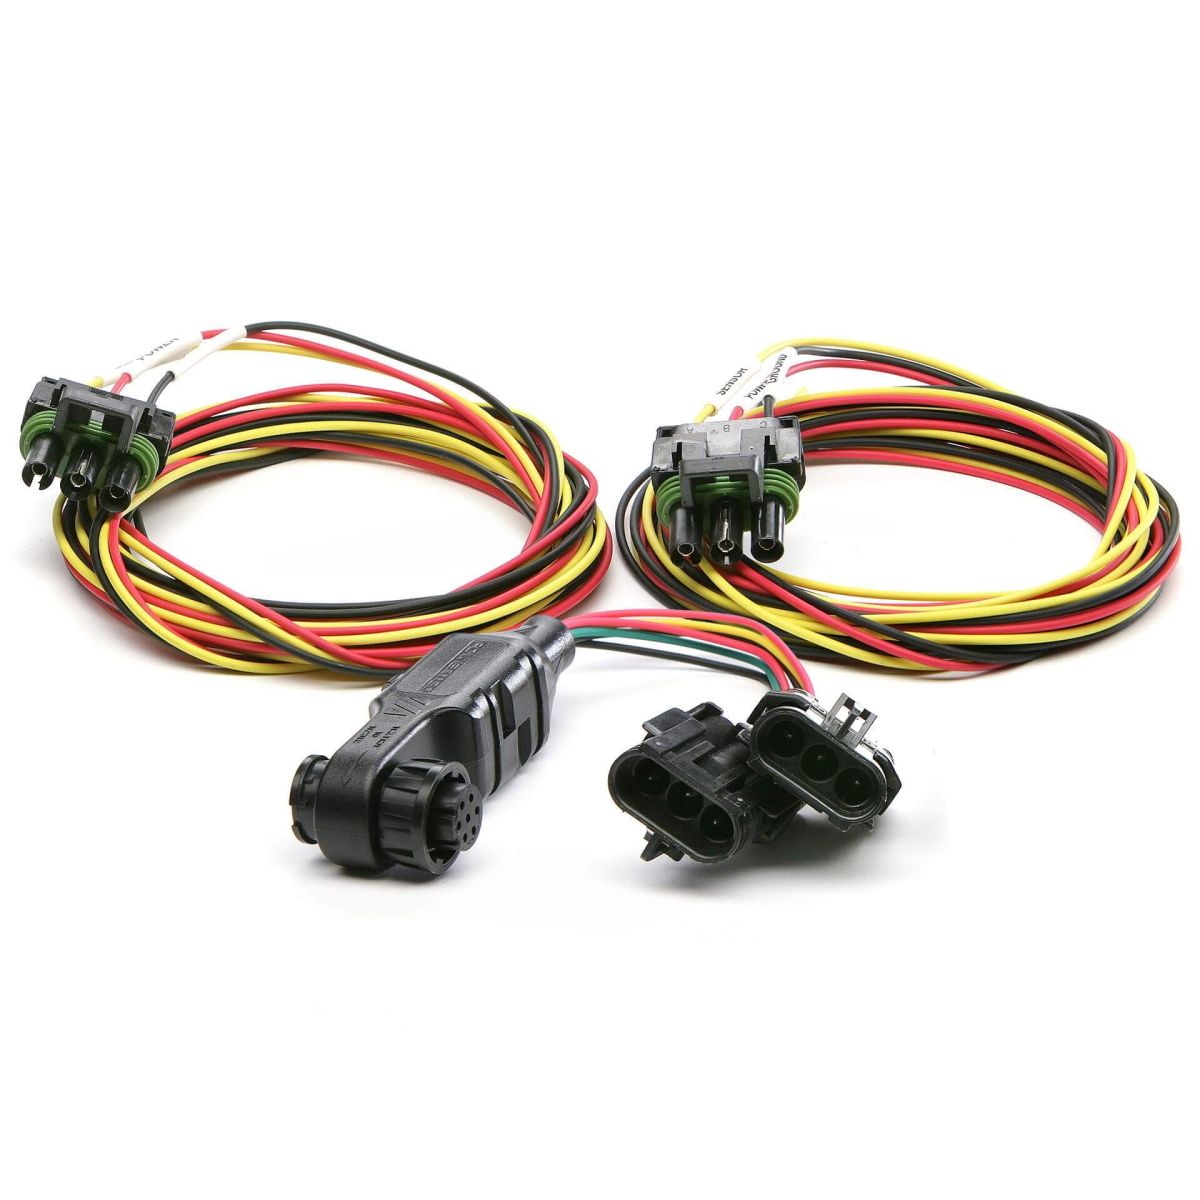 Edge Products - Edge Accessory System Expandable 5 Volt Universal Sensor Input For CS2/CTS2/CTS3